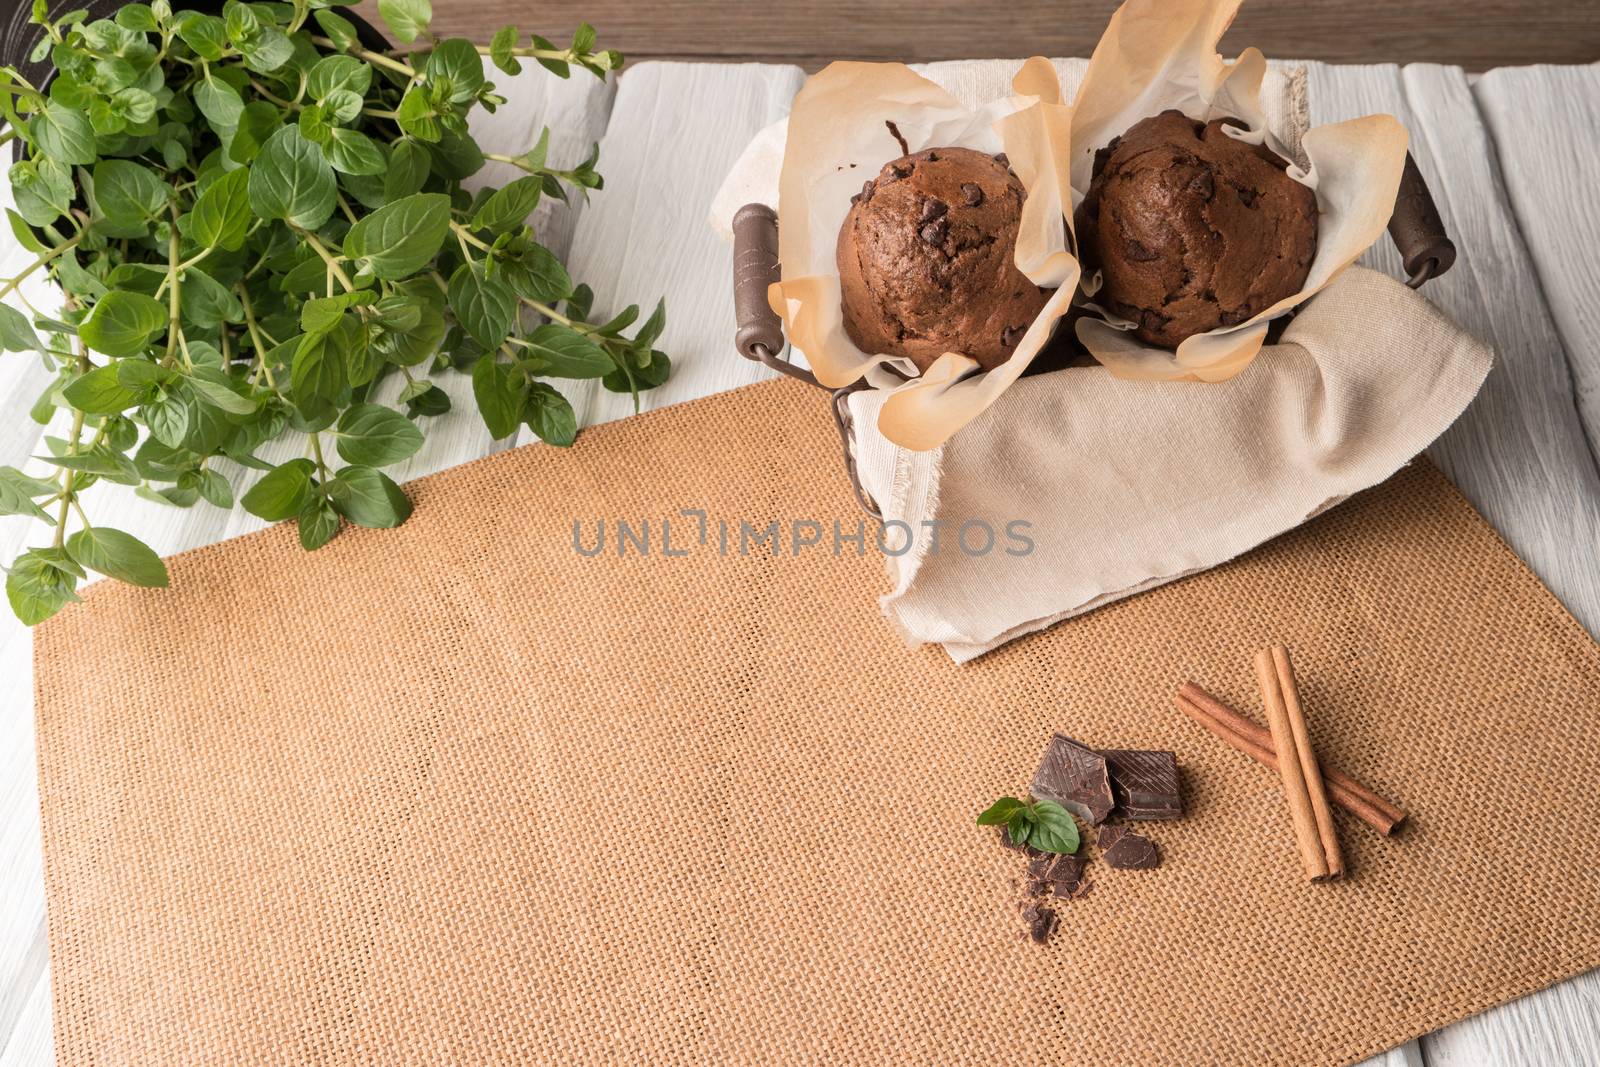 Chocolate muffins by AnaMarques